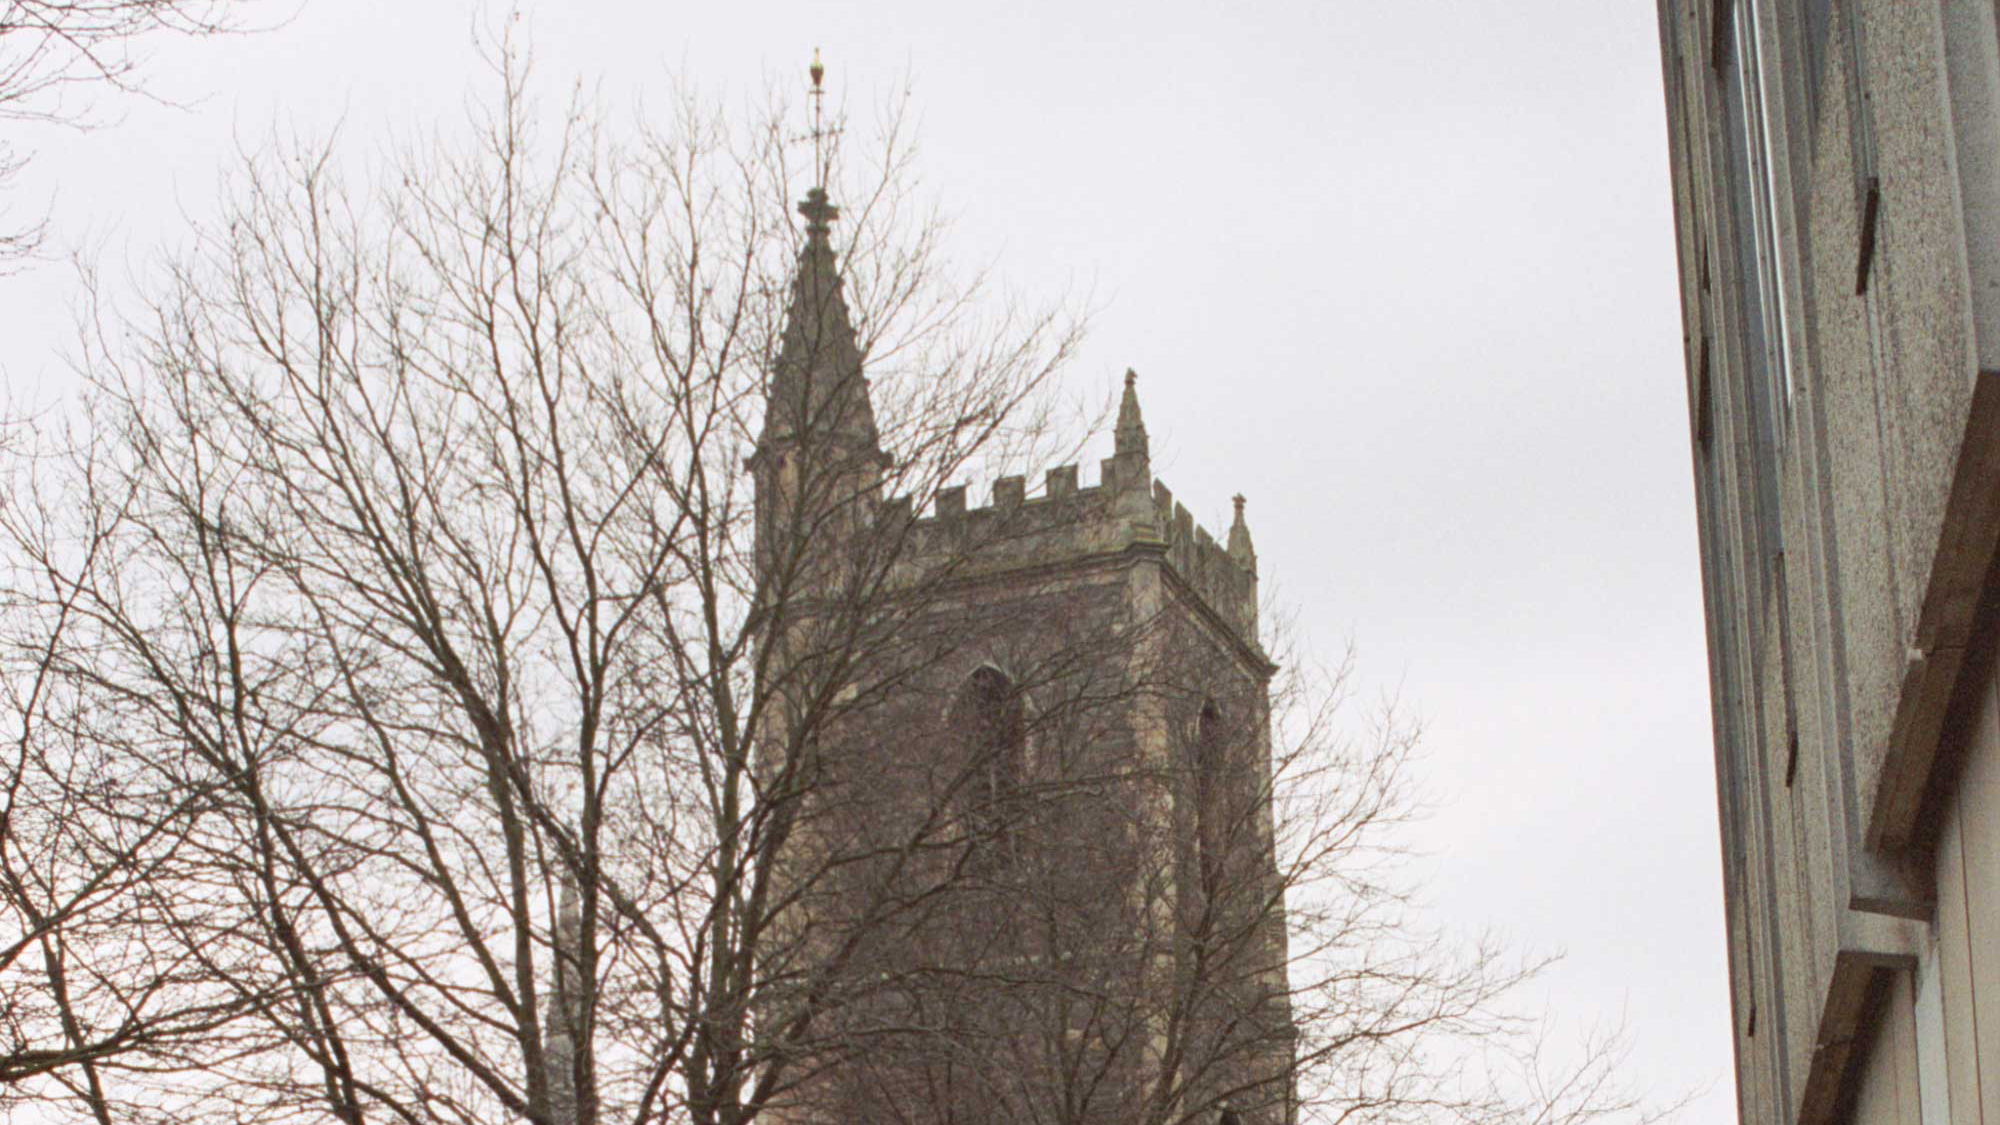 Remains of church tower surrounded by modern buildings